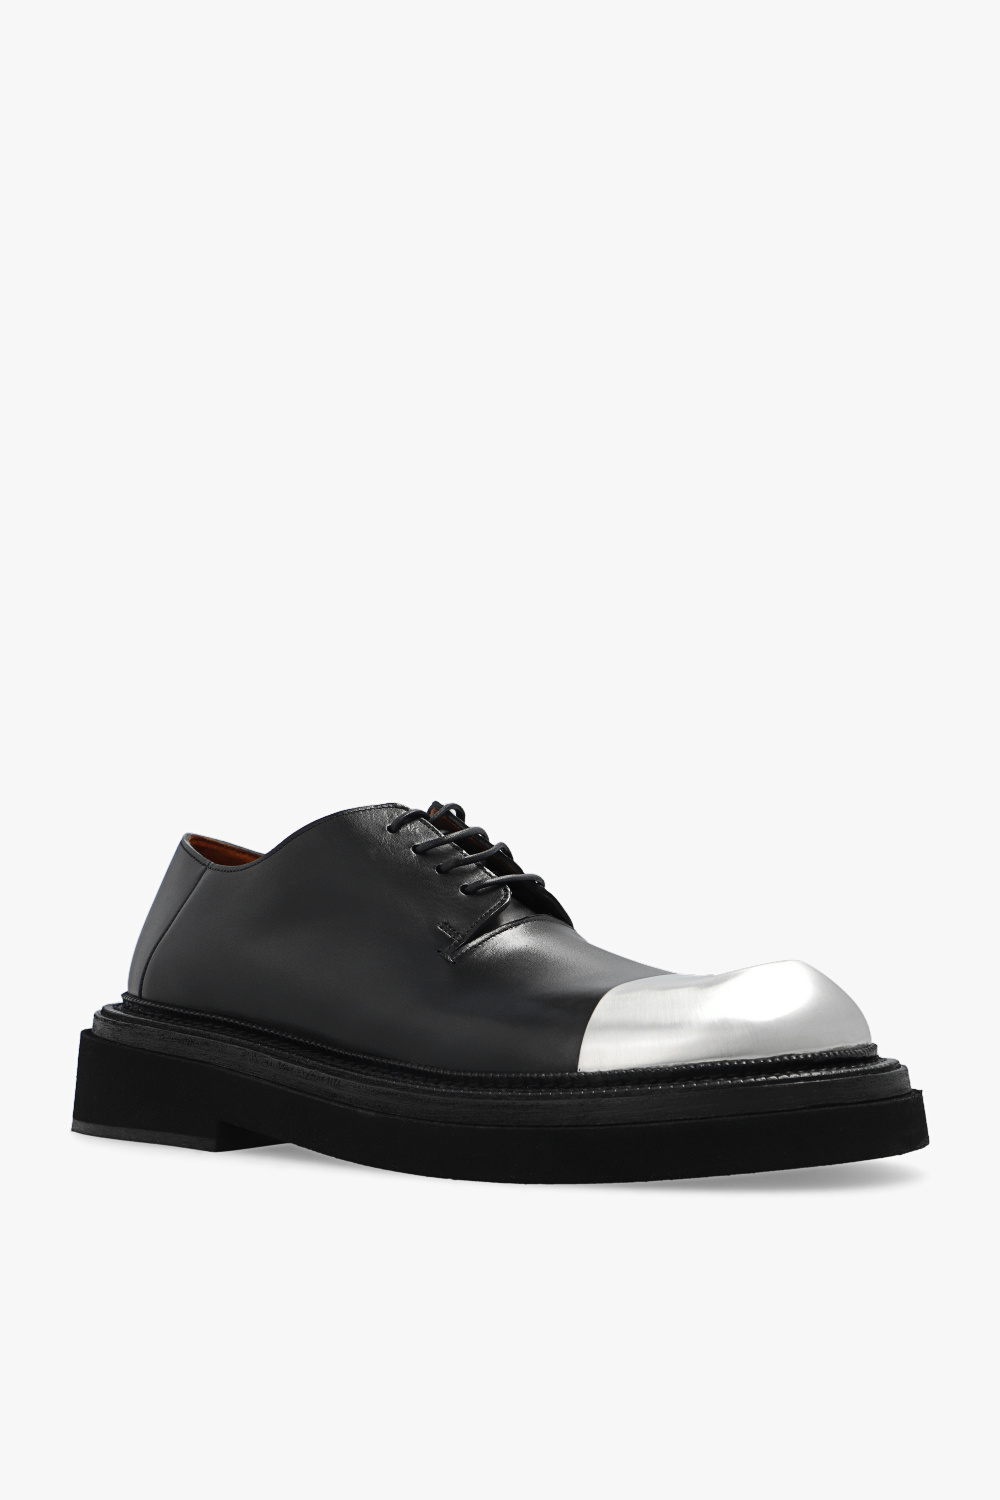 Marsell ‘Pollicione’ leather Derby shoes